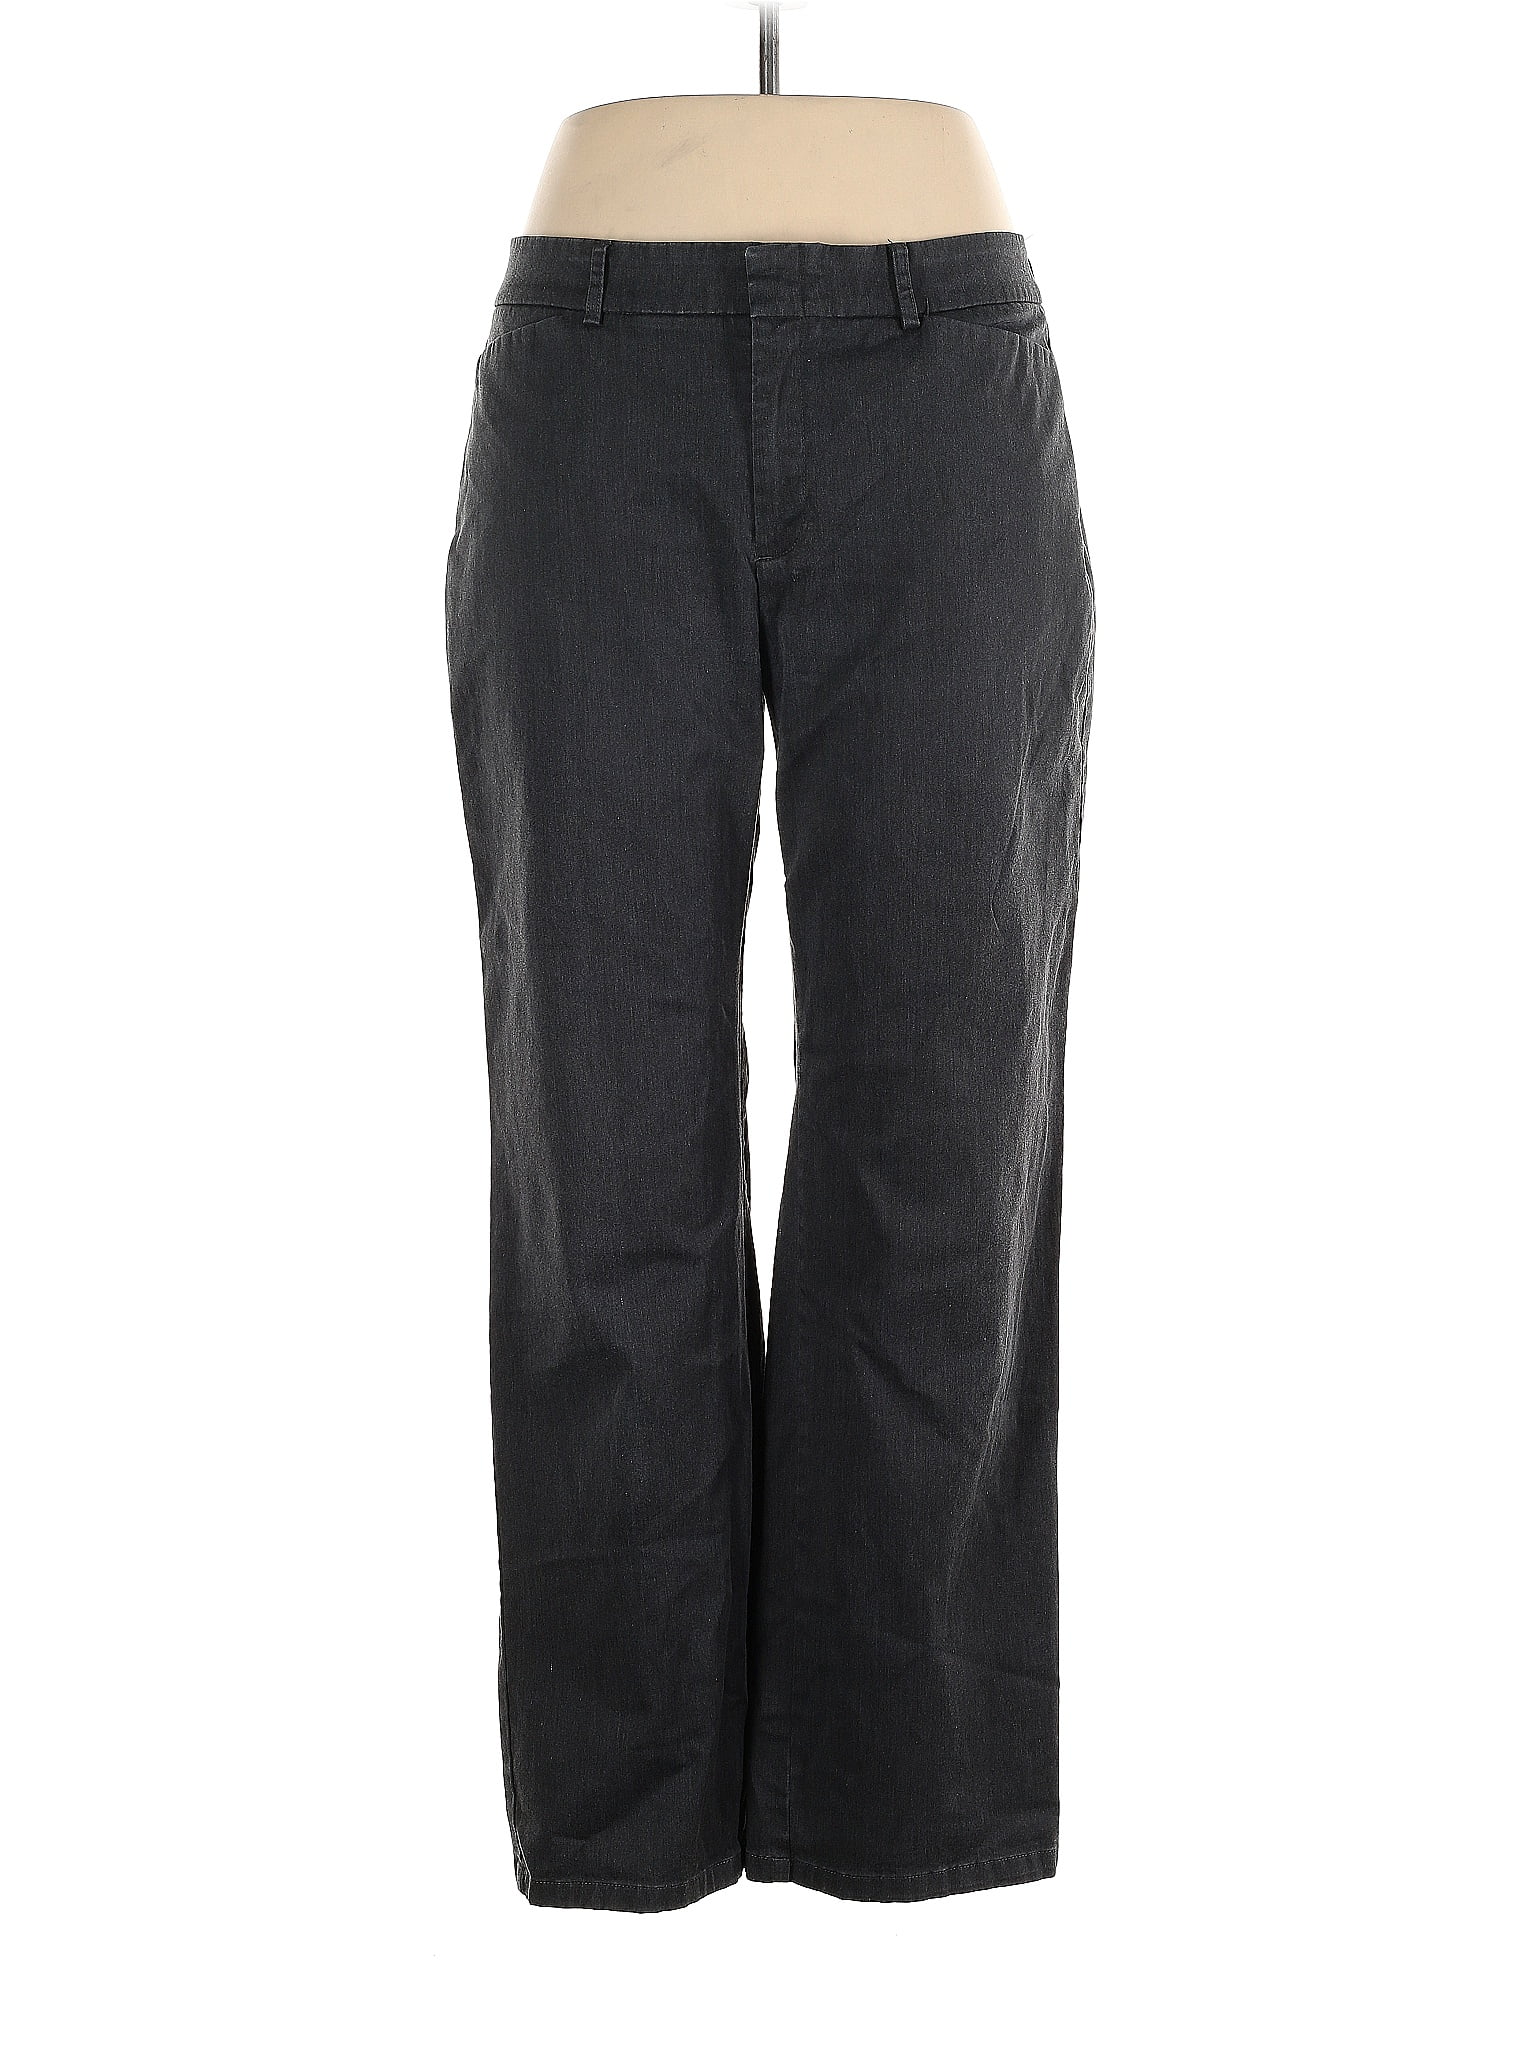 Dockers Black Gray Casual Pants Size 14 - 66% off